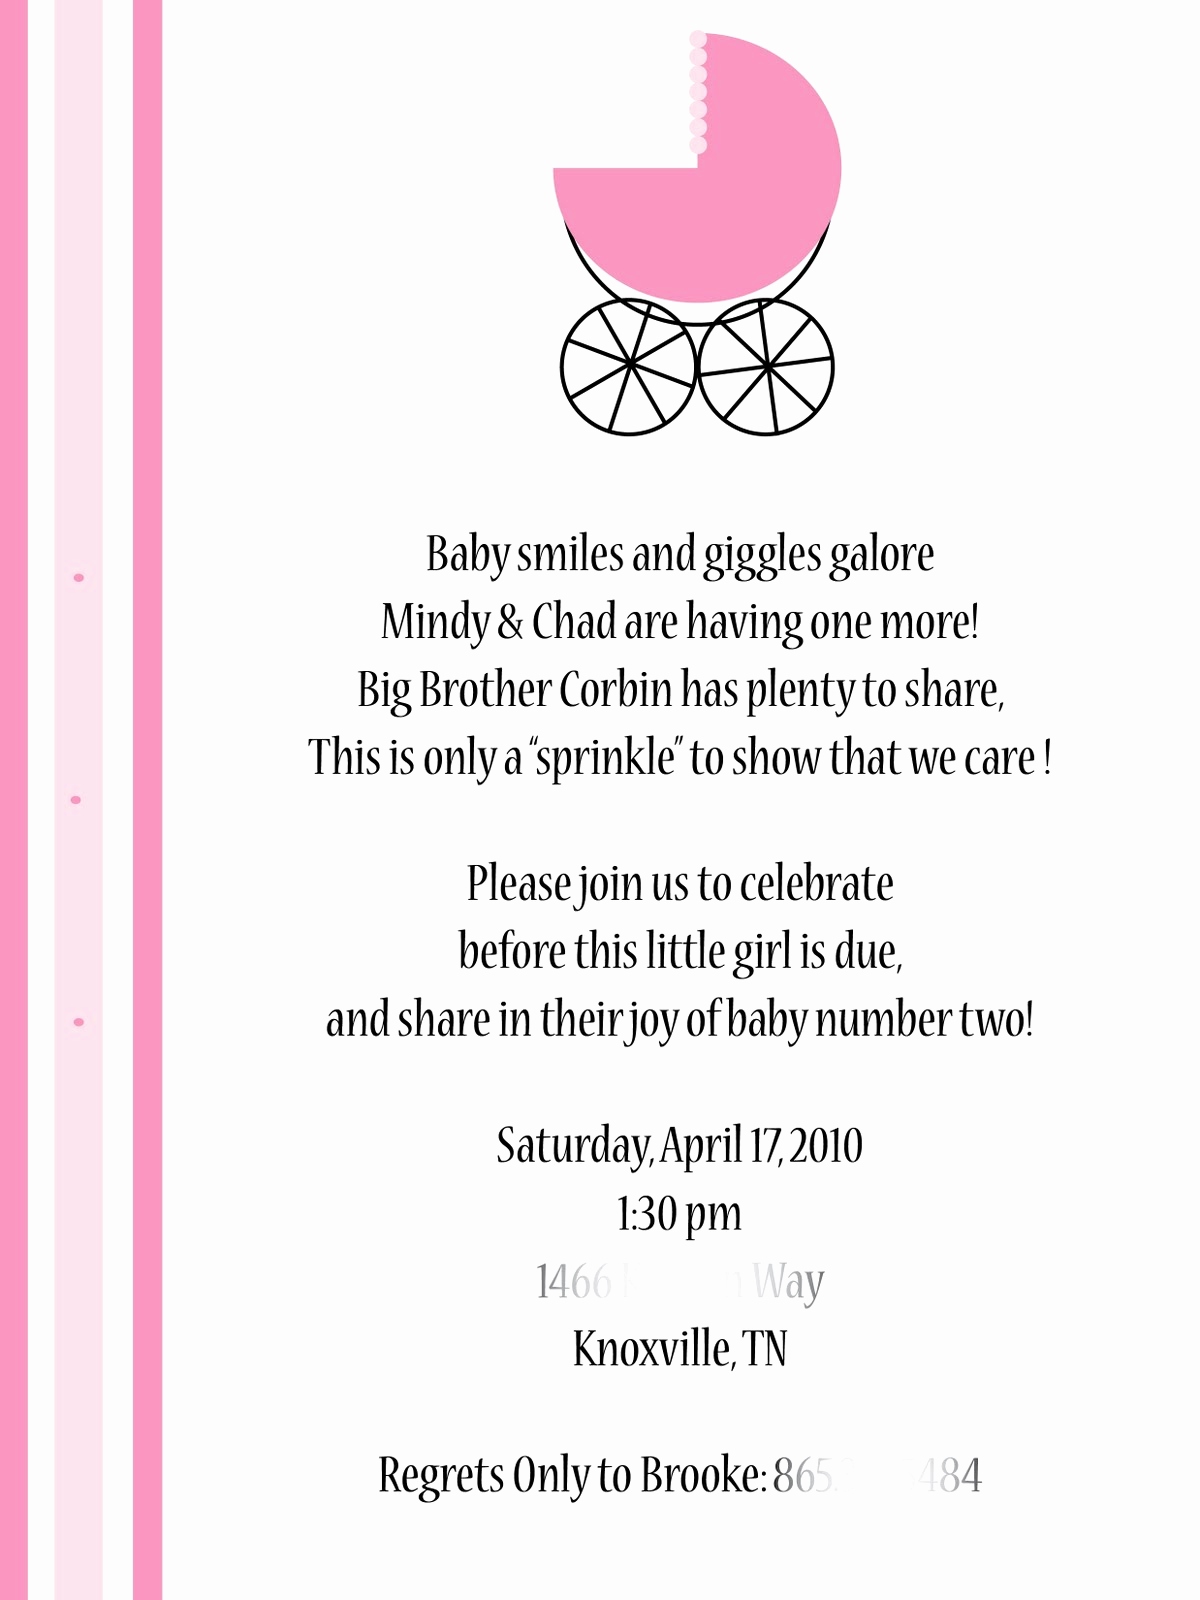 Full Size of Baby Shower:36+ Retro Baby Shower Thank You Wording Image Concepts Baby Shower Thank You Wording As Well As Coed Baby Shower With Baby Shower Favors To Make Plus Baby Shower Para Niño Together With Ideas Para Baby Shower